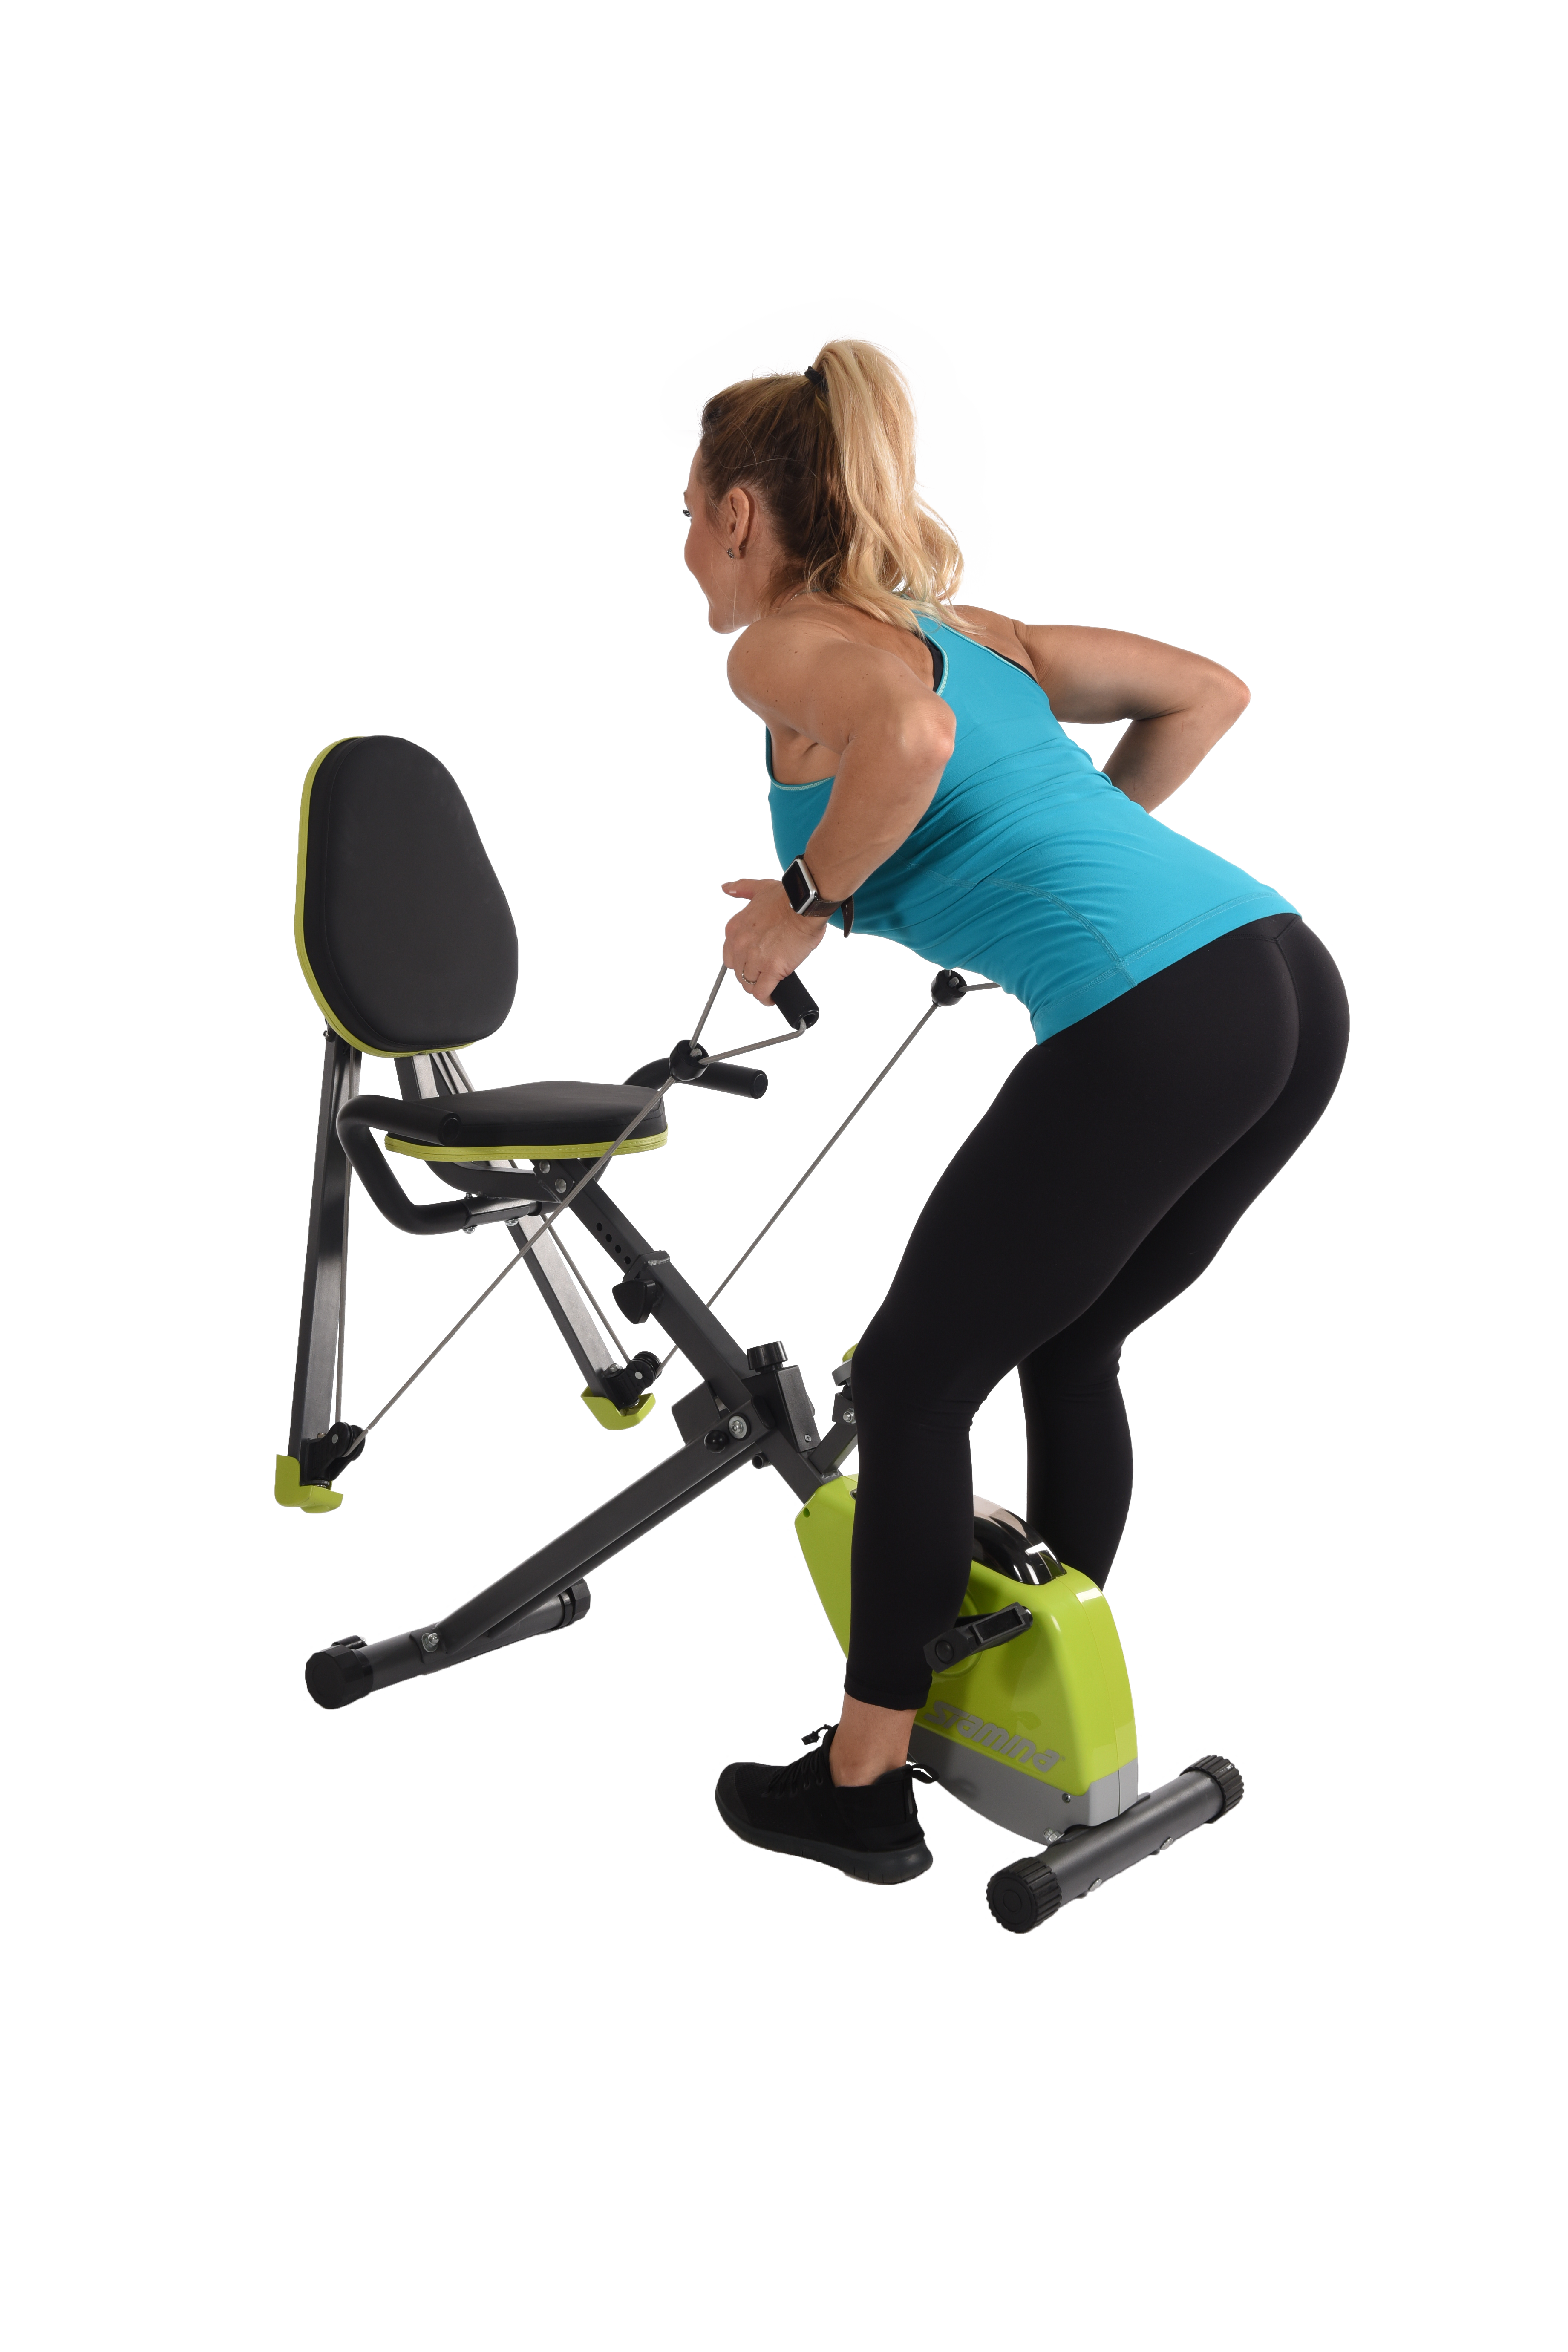 Performing bent over rows on Stamina Wonder Exercise Bike With Strength System.